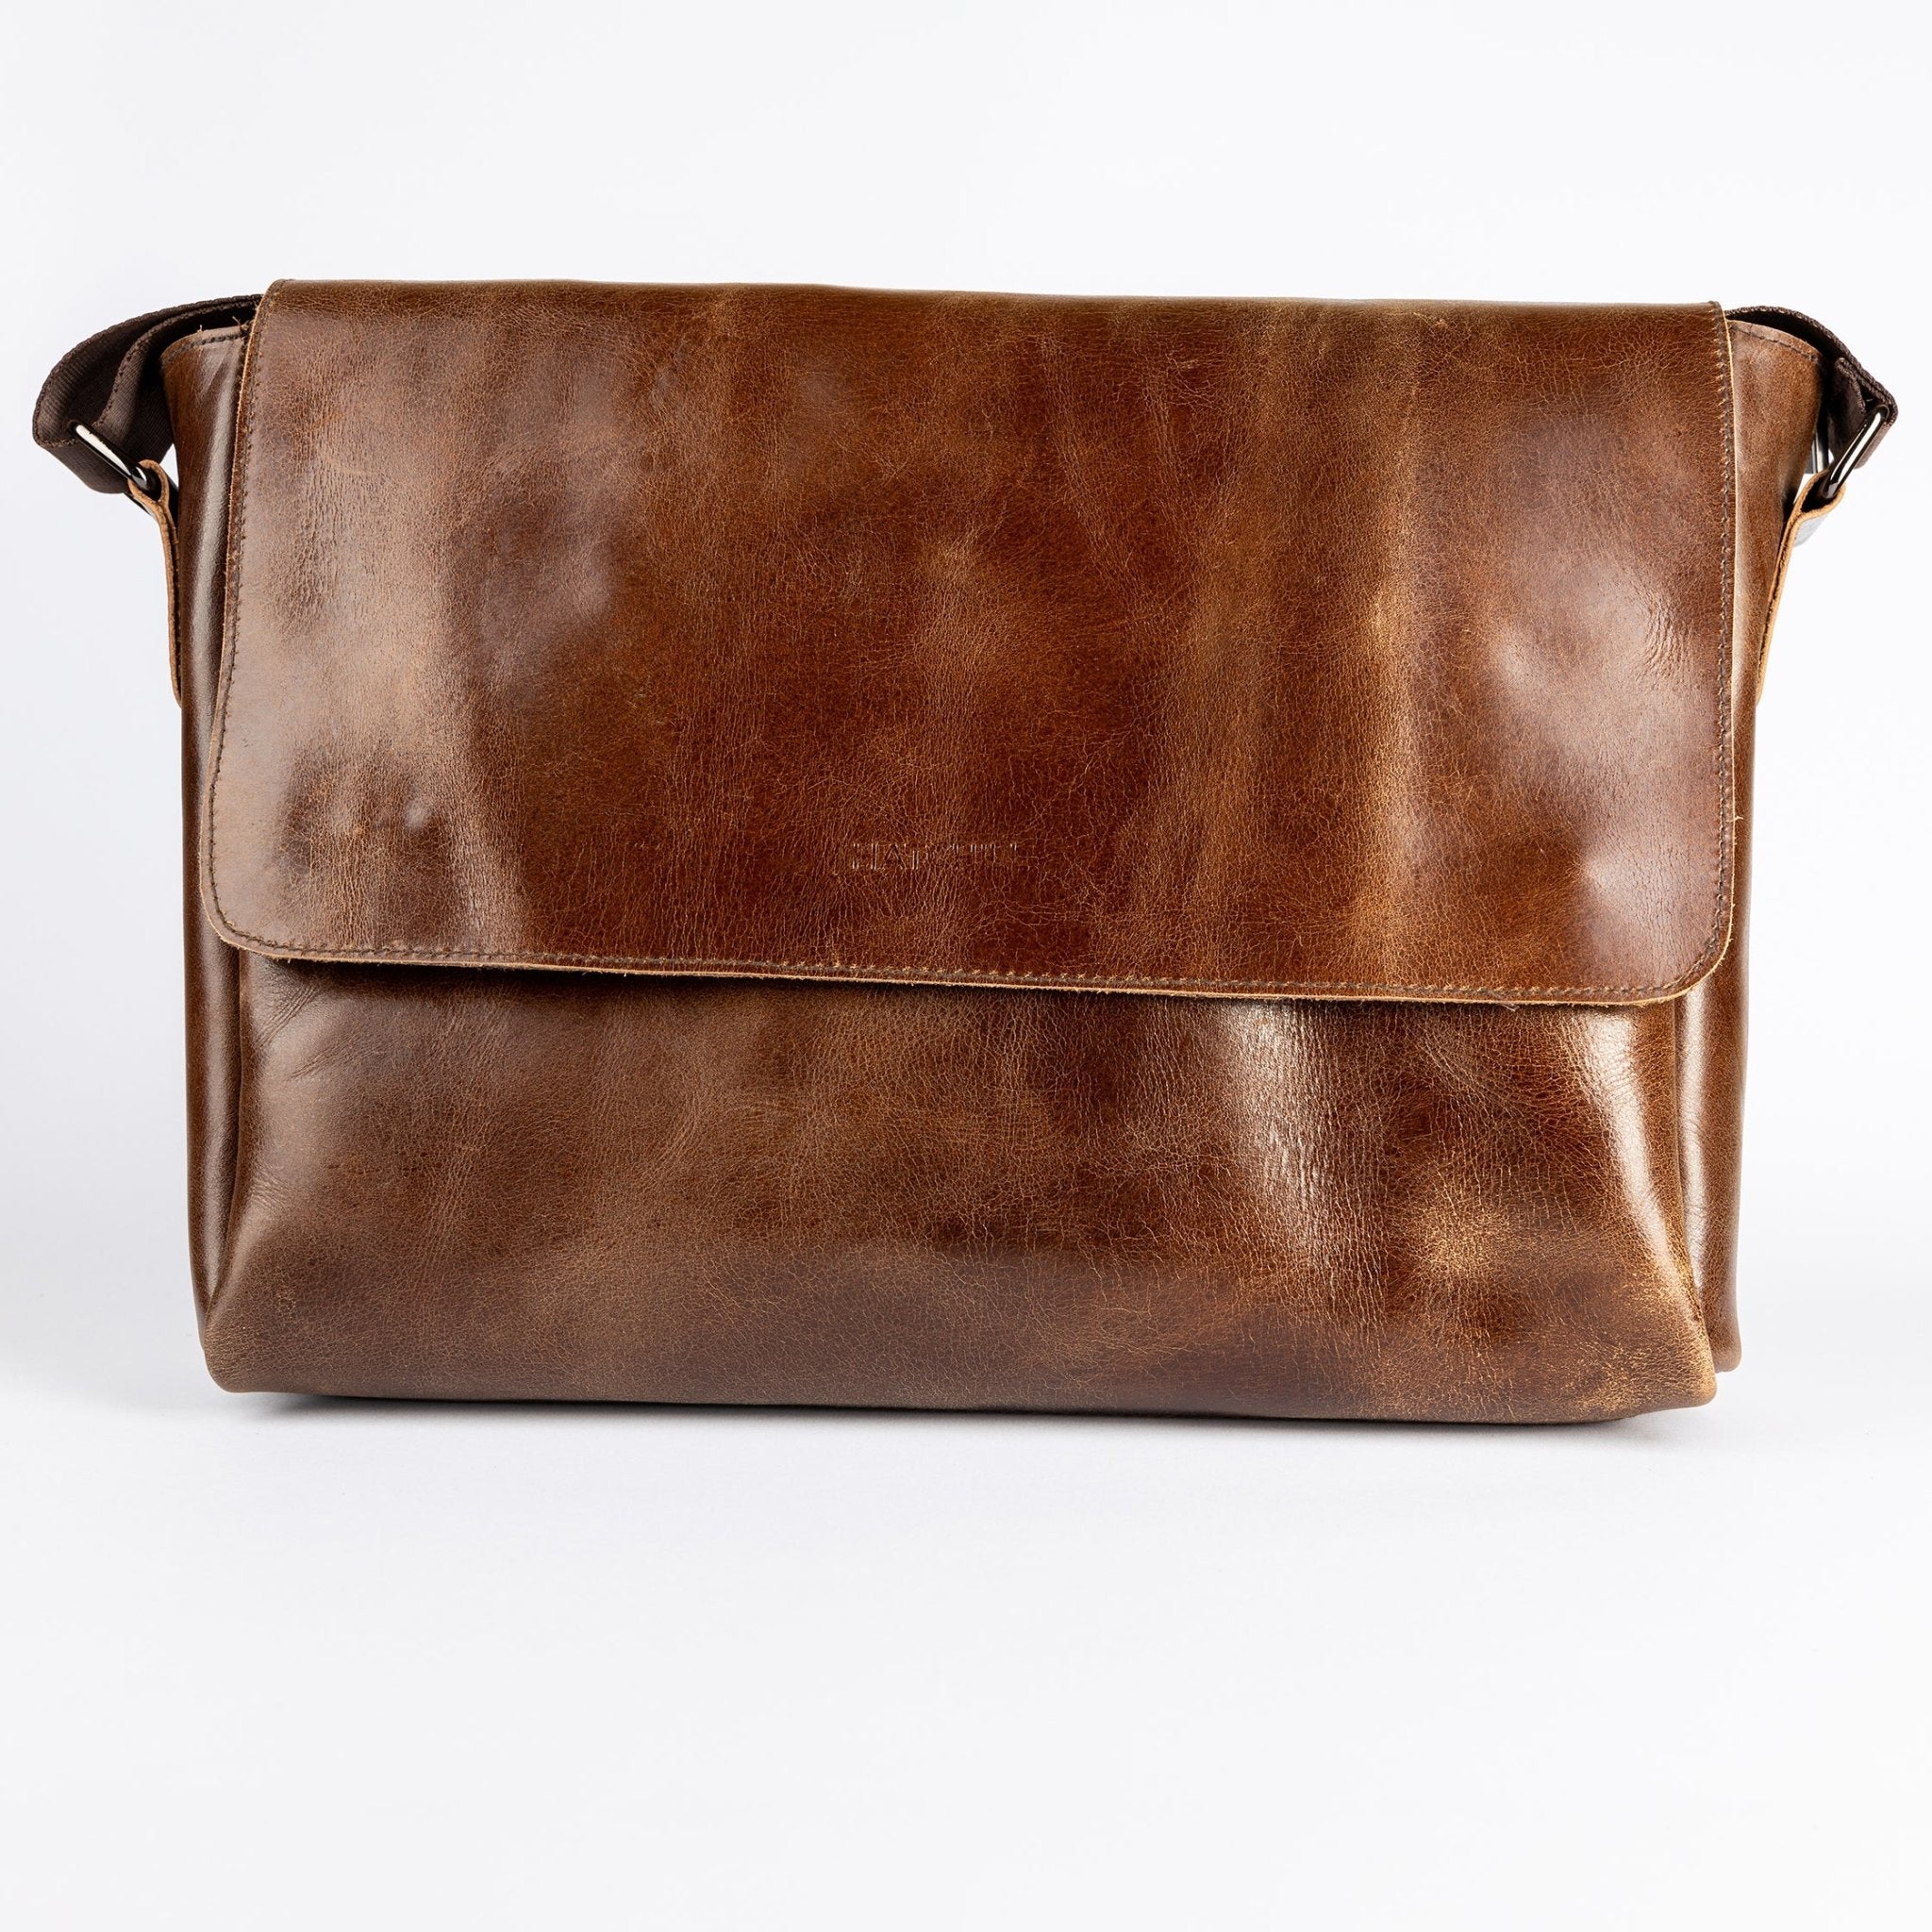 Leather Everyday bag - Choclate - Hatchill